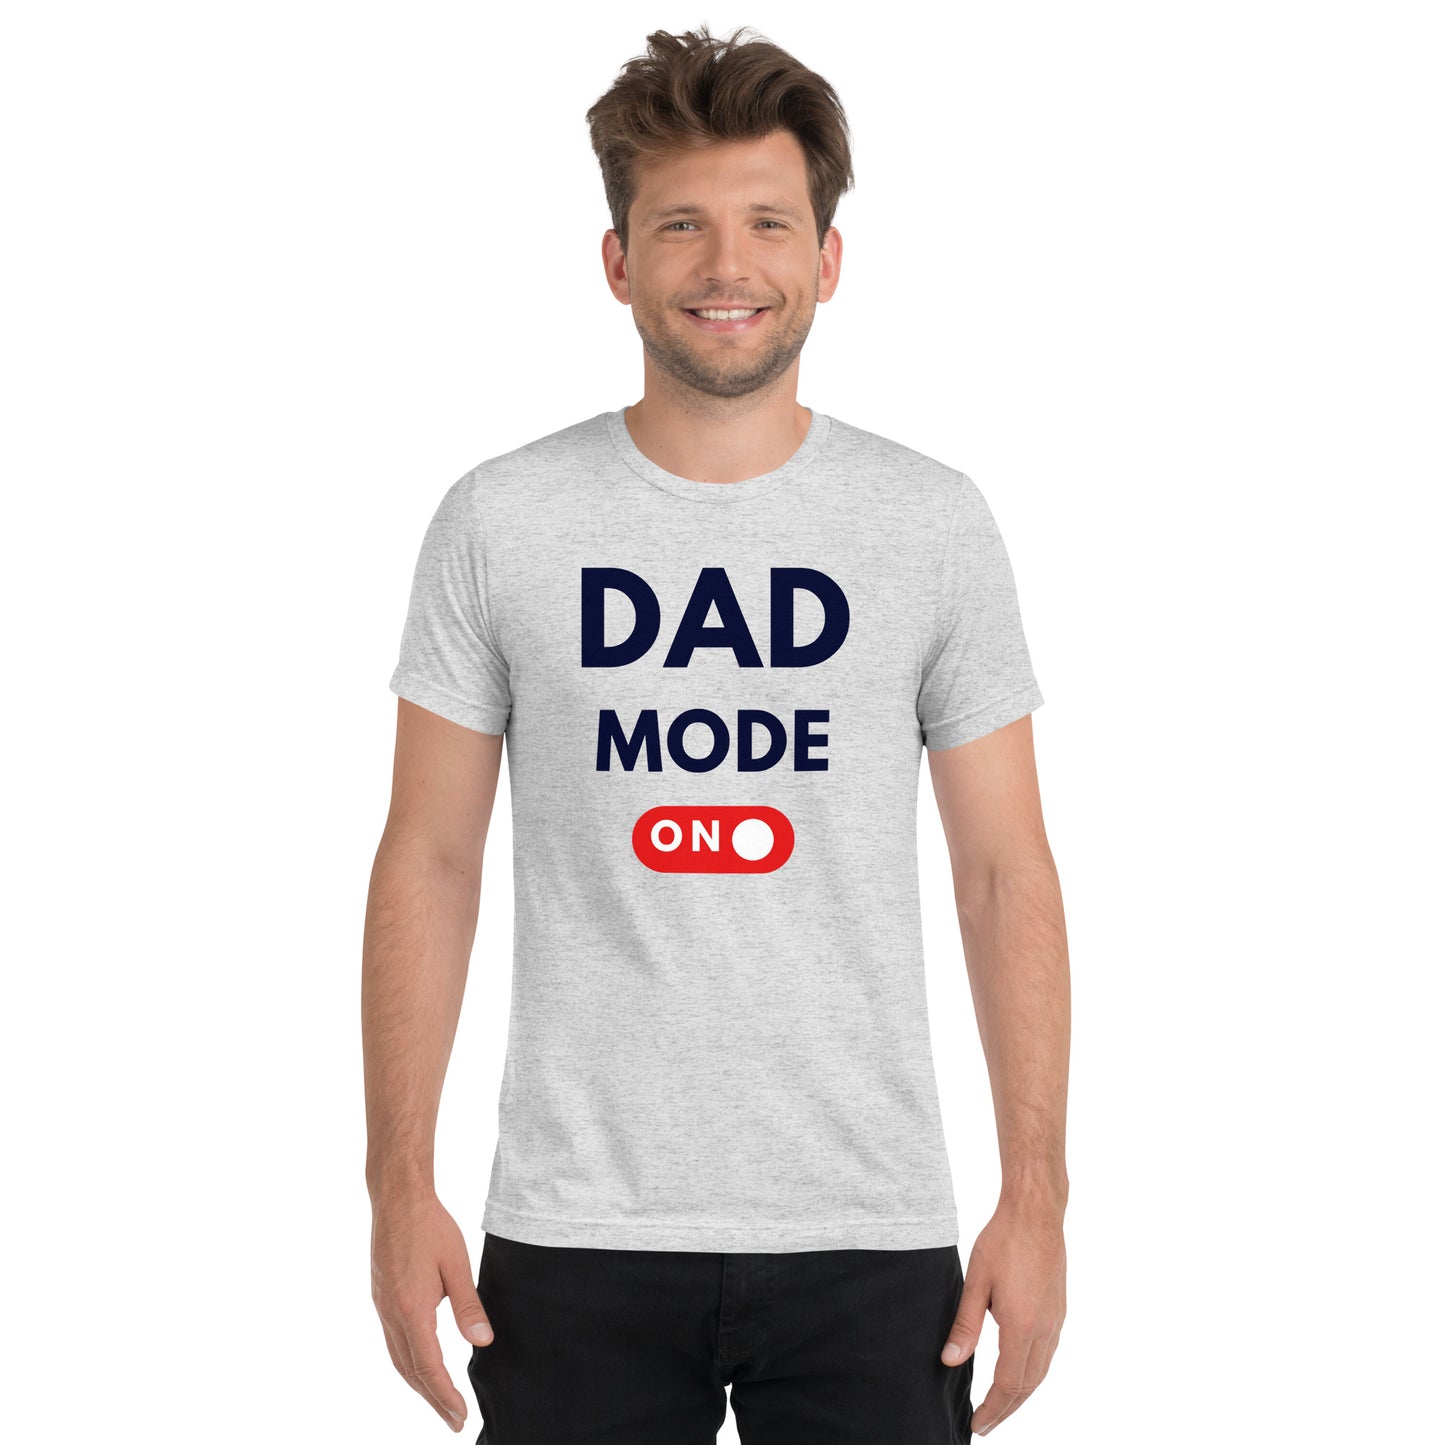 Dad Mode ON Adult Unisex Father's Day T-shirt